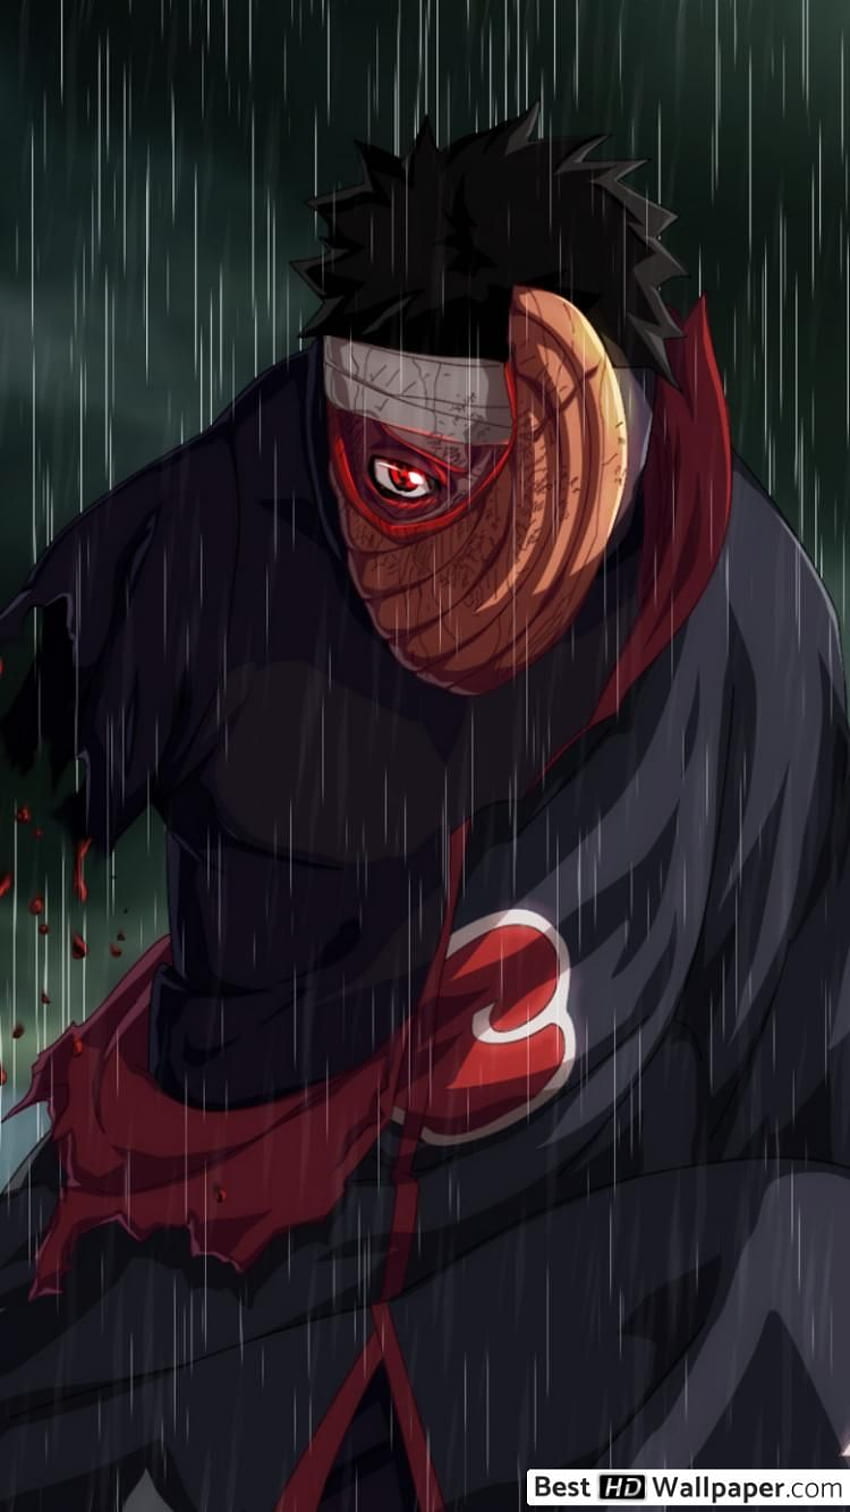 Download wallpaper 840x1336 naruto obito uchiha art iphone 5 iphone 5s  iphone 5c ipod touch 840x1336 hd background 19716